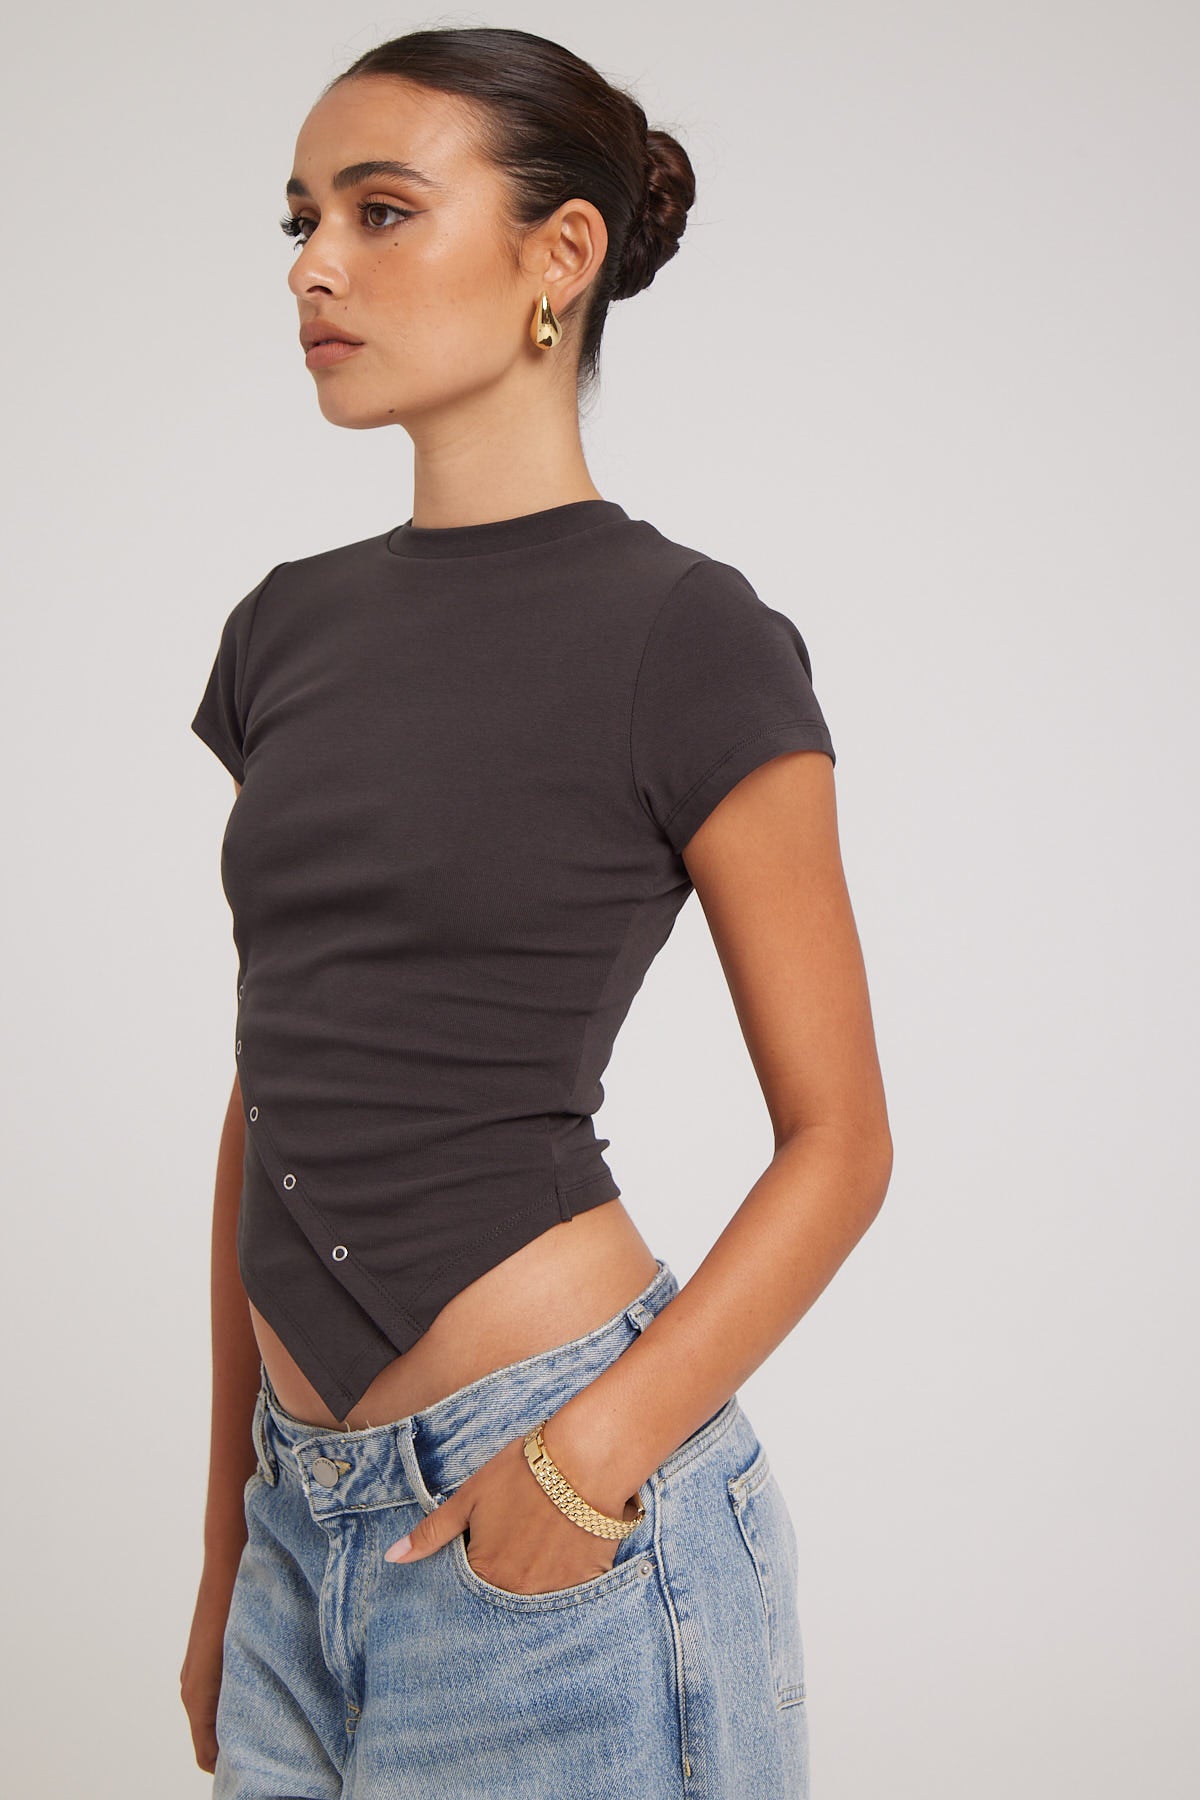 Luck & Trouble Asymmetrical Press Stud Tee Charcoal